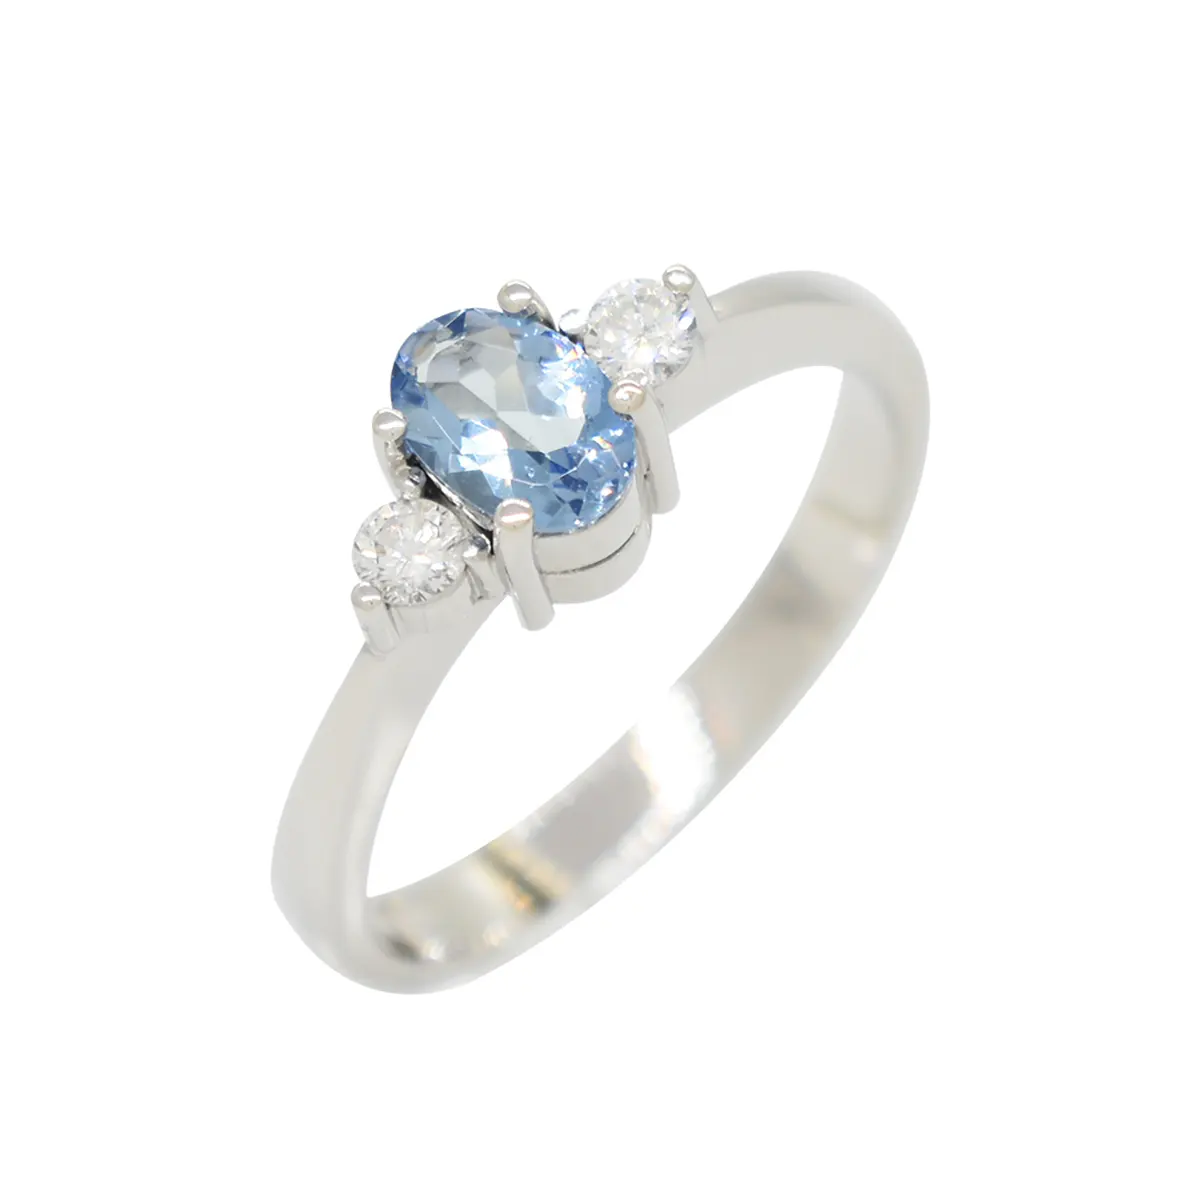 3 Stones Ring with Oval Shape Aquamarine and Brilliant Cut Diamonds in White Gold